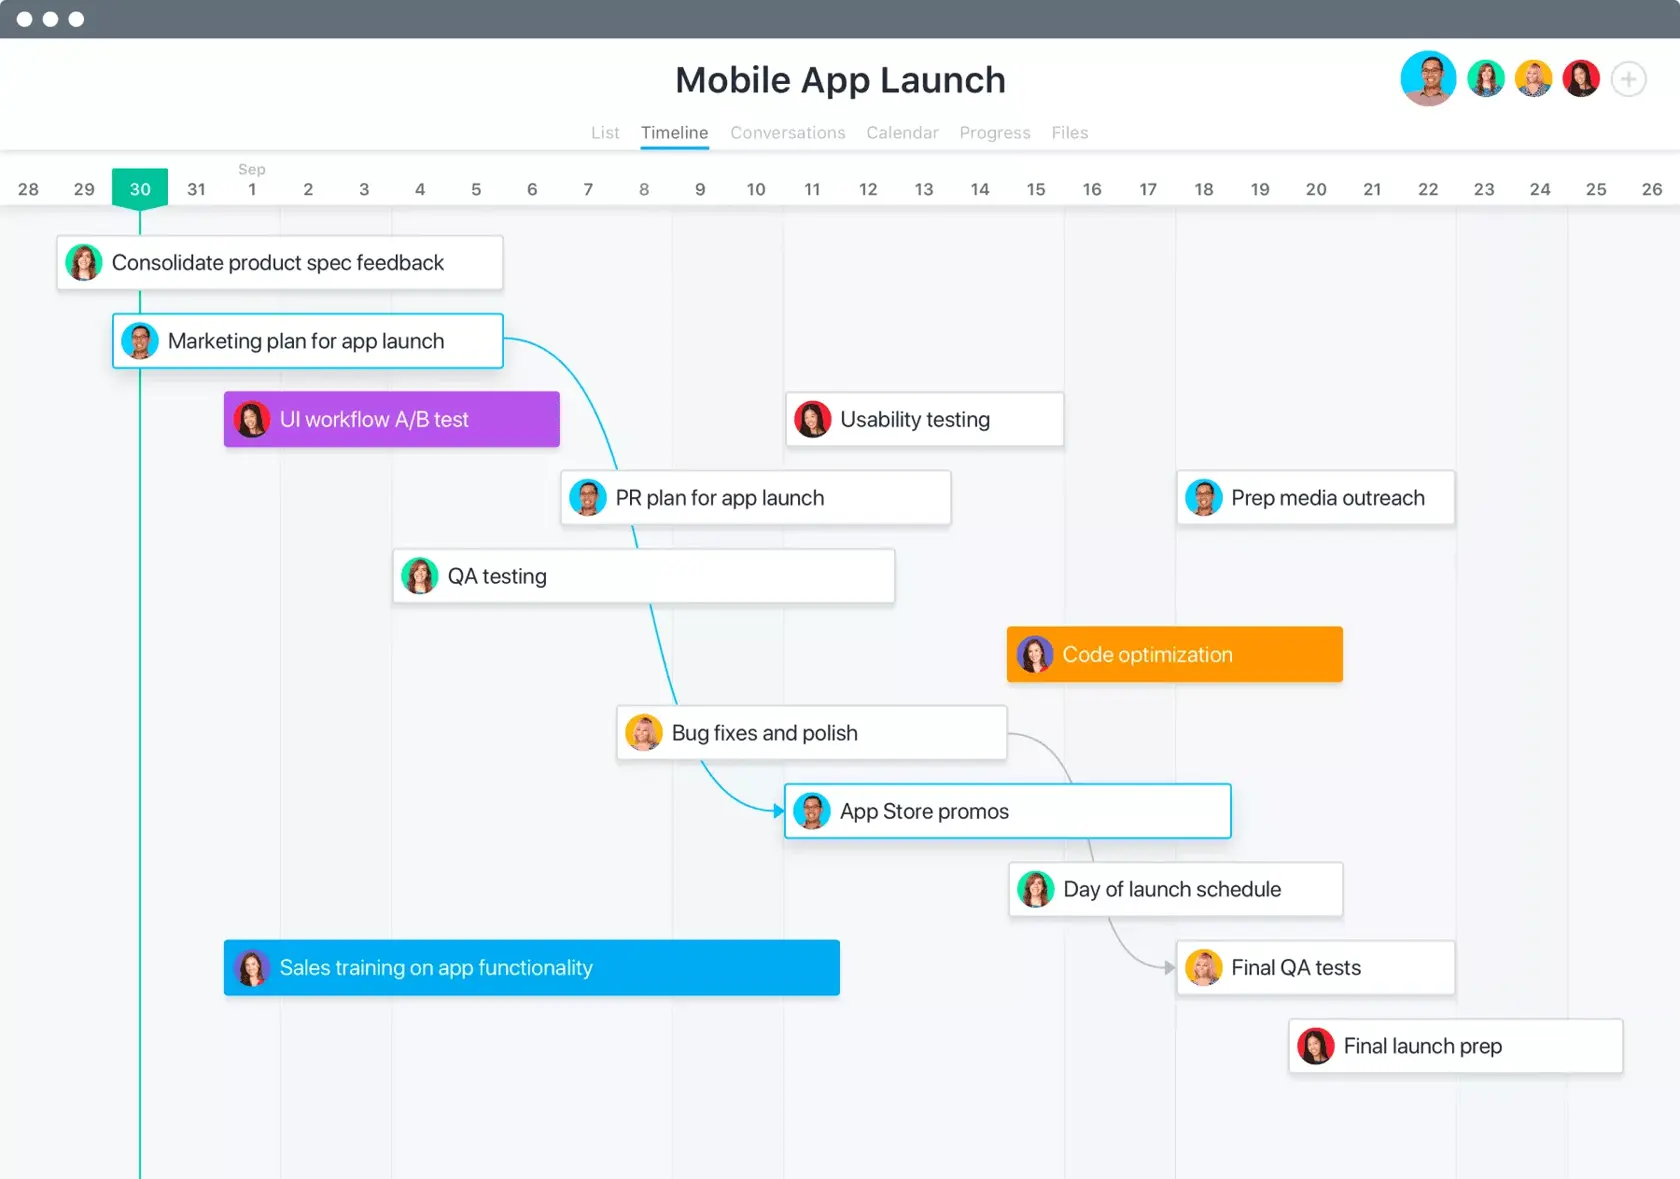 [Old Product UI] Mobile app launch project in Asana (Timeline)